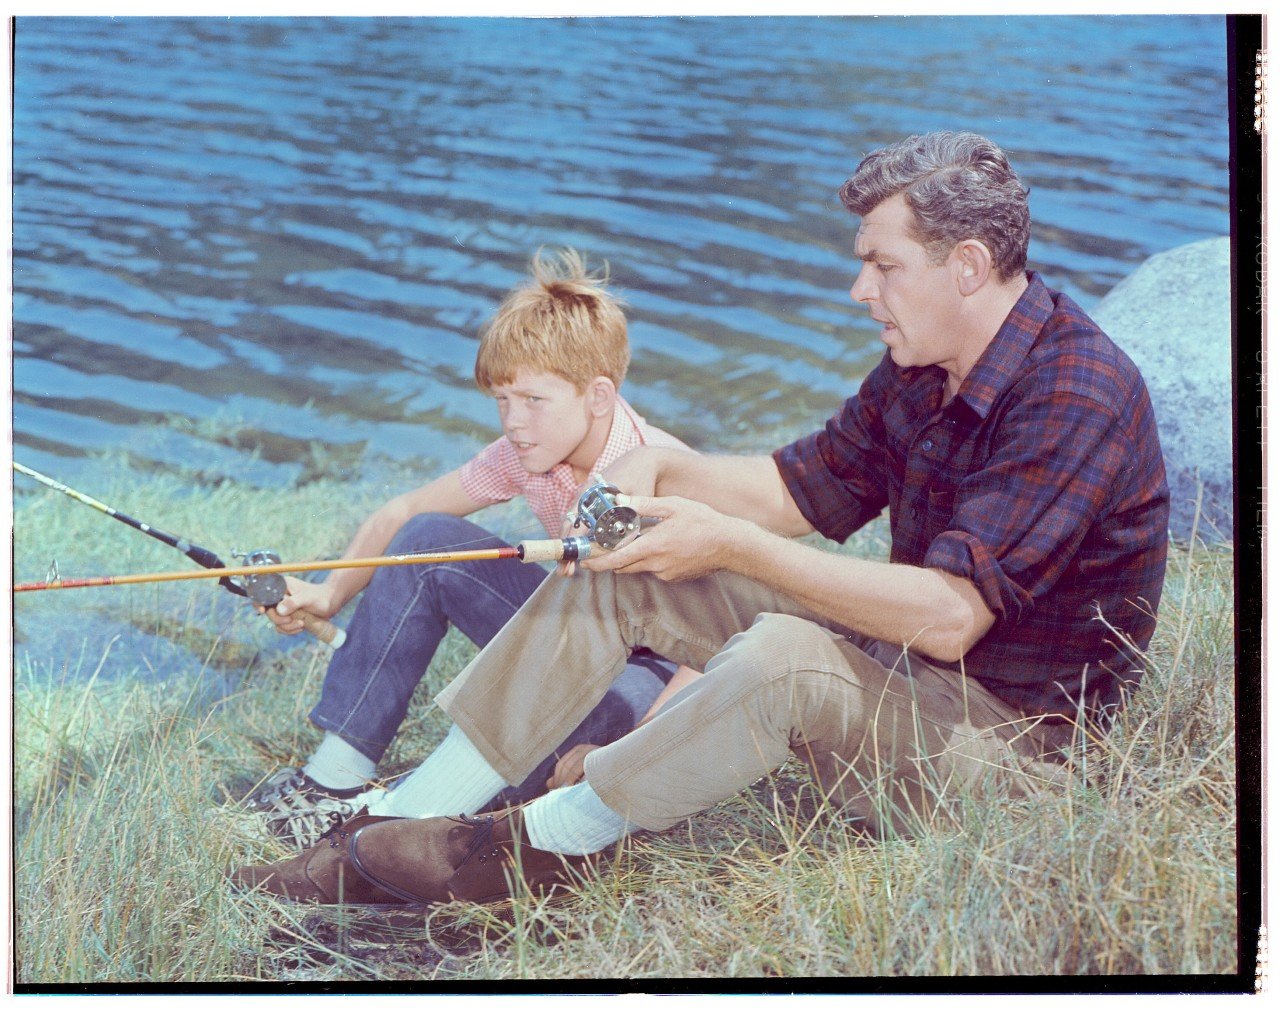 Ron Howard and Andy Griffith | CBS via Getty Images